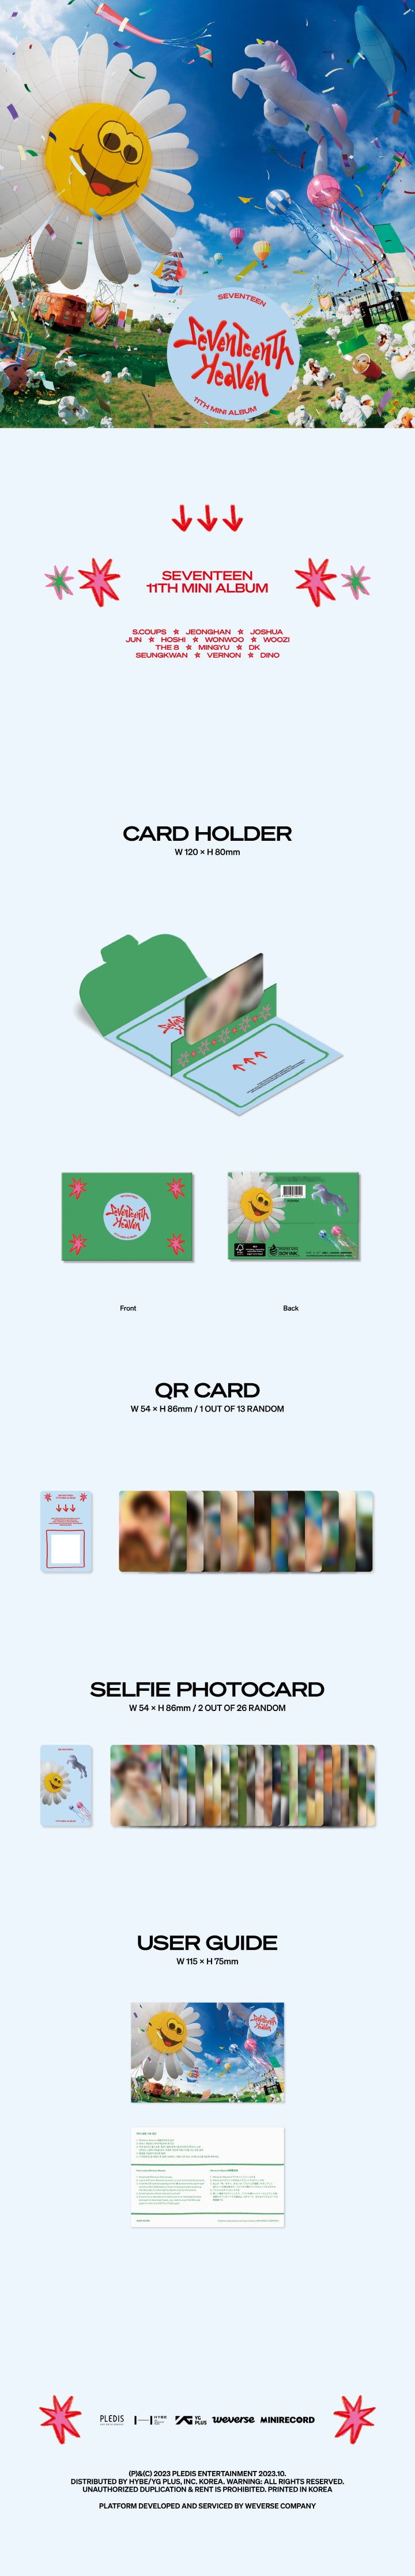 1 QR Card (random out of 13 types)
2 Selfie Photo Cards (random out of 26 types)